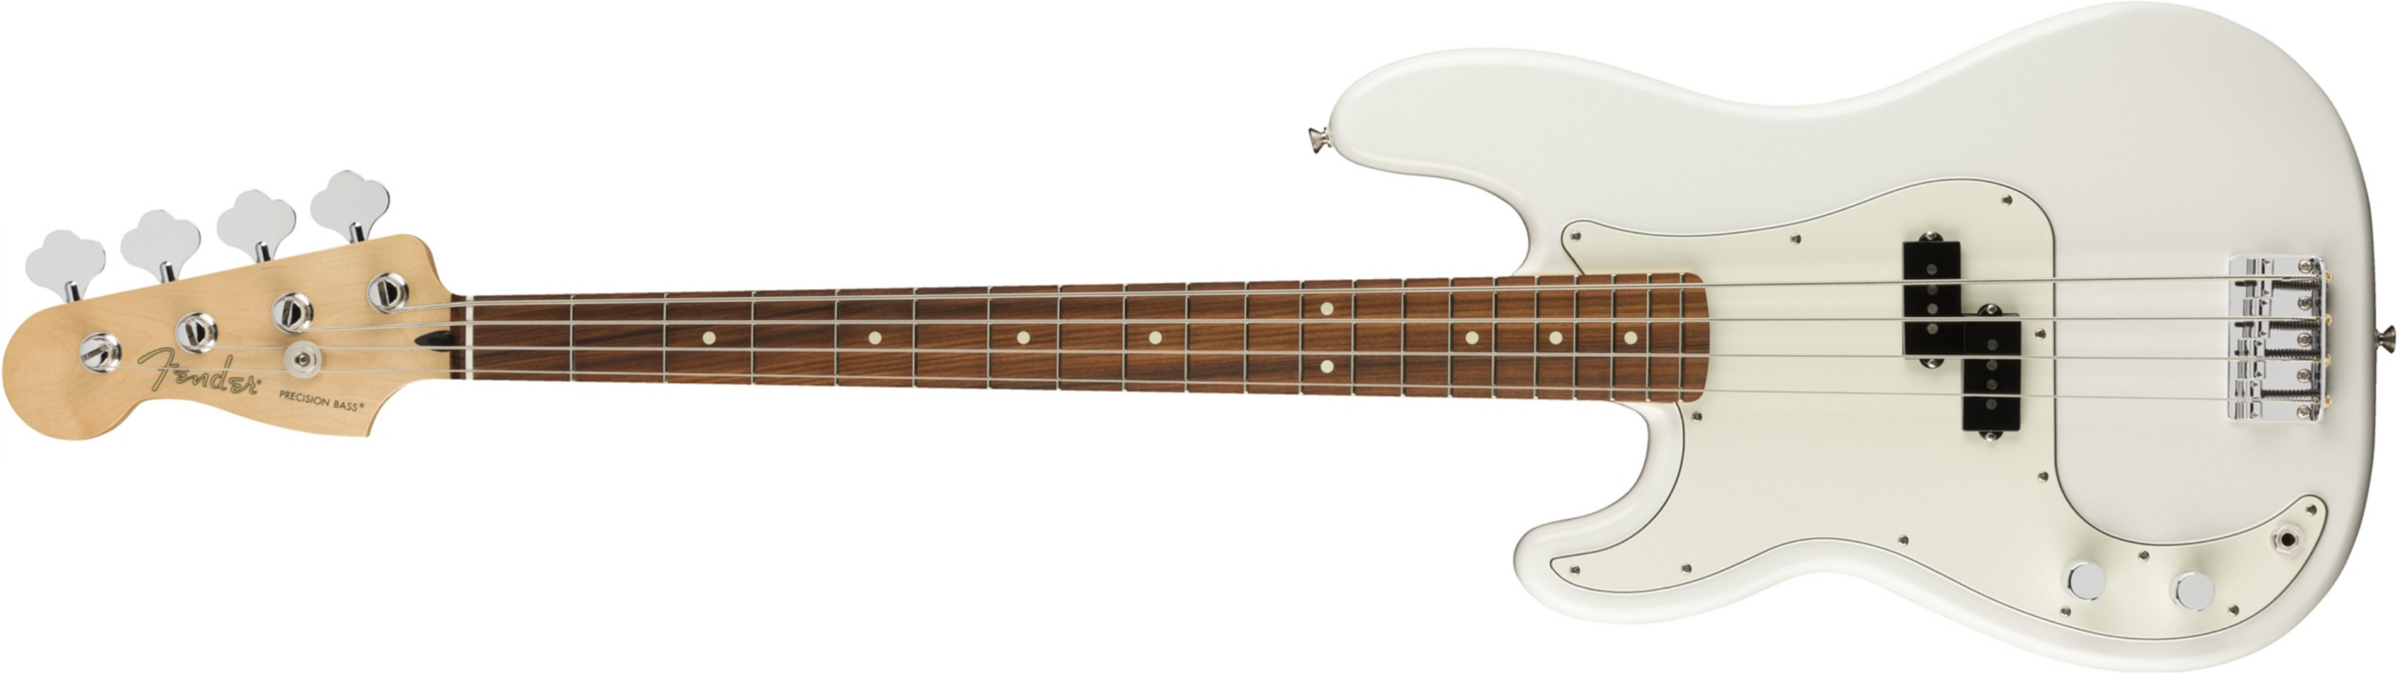 Fender Precision Bass Player Lh Gaucher Mex Pf - Polar White - Solid body electric bass - Main picture